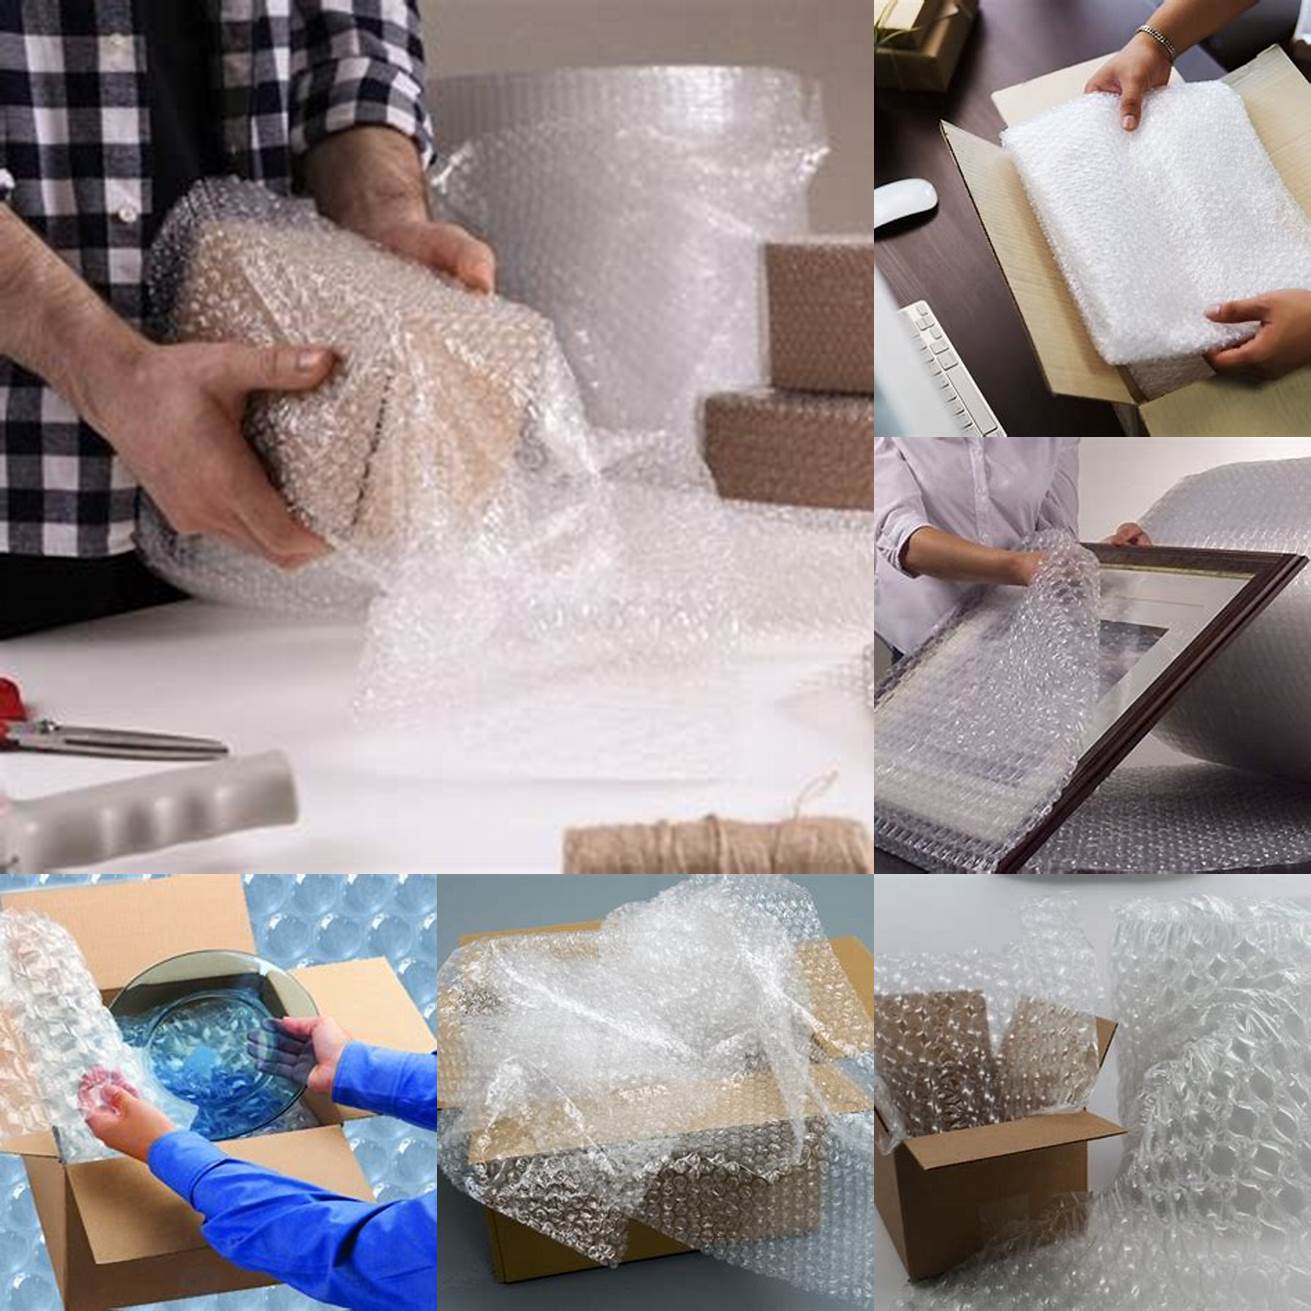 Bubble wrap being used to package furniture